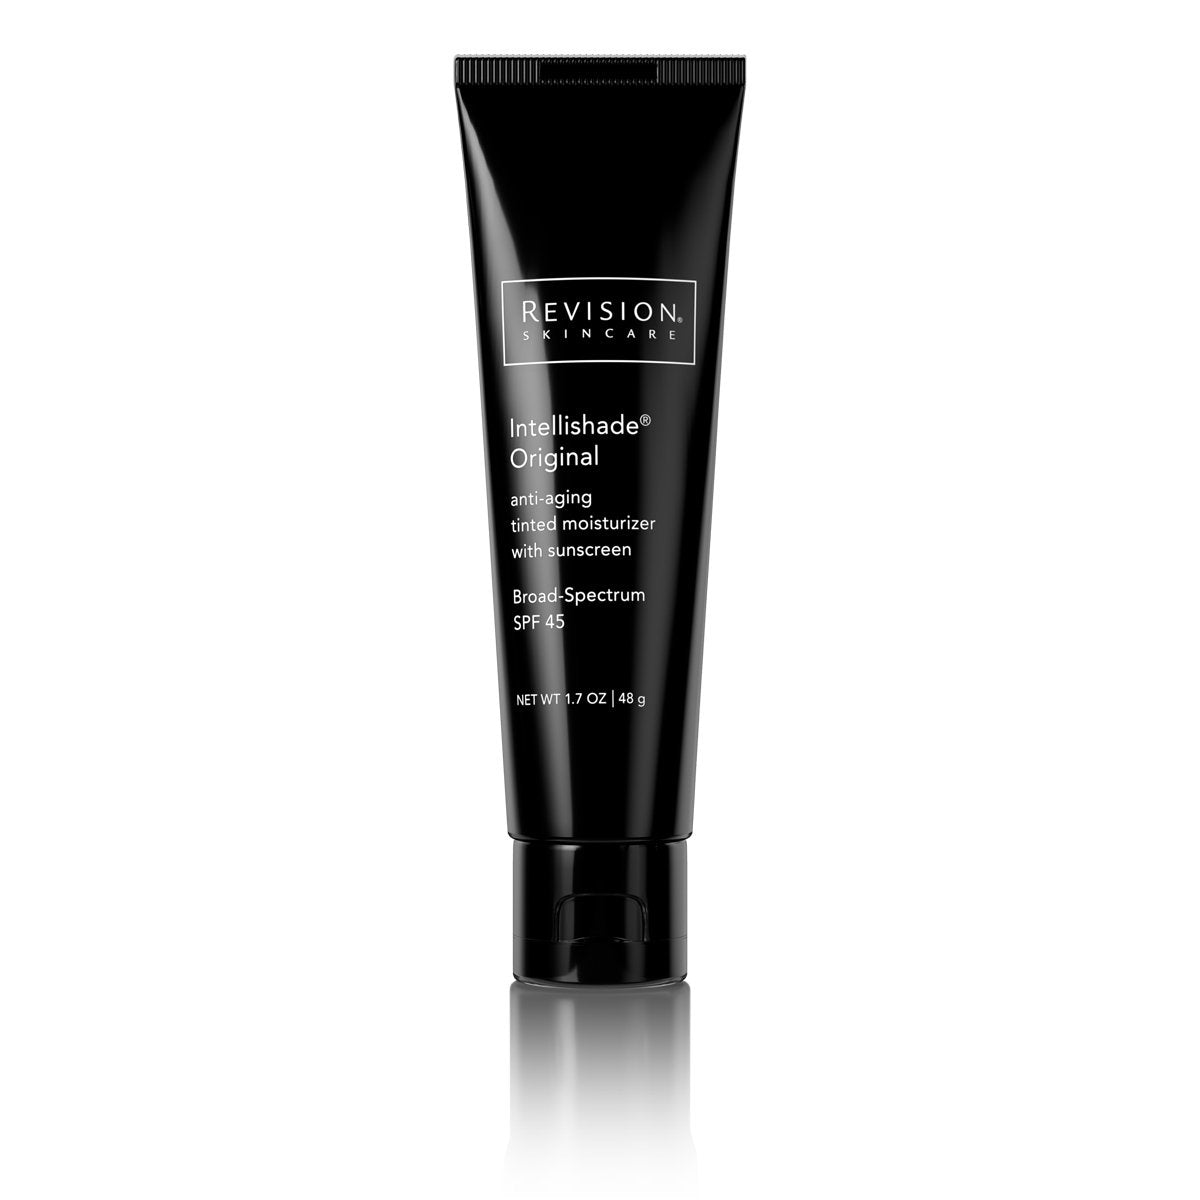 Revision Skincare Intellishade Original Daily Moisturizer with Sunscreen from MyExceptionalSkinCare.com Front